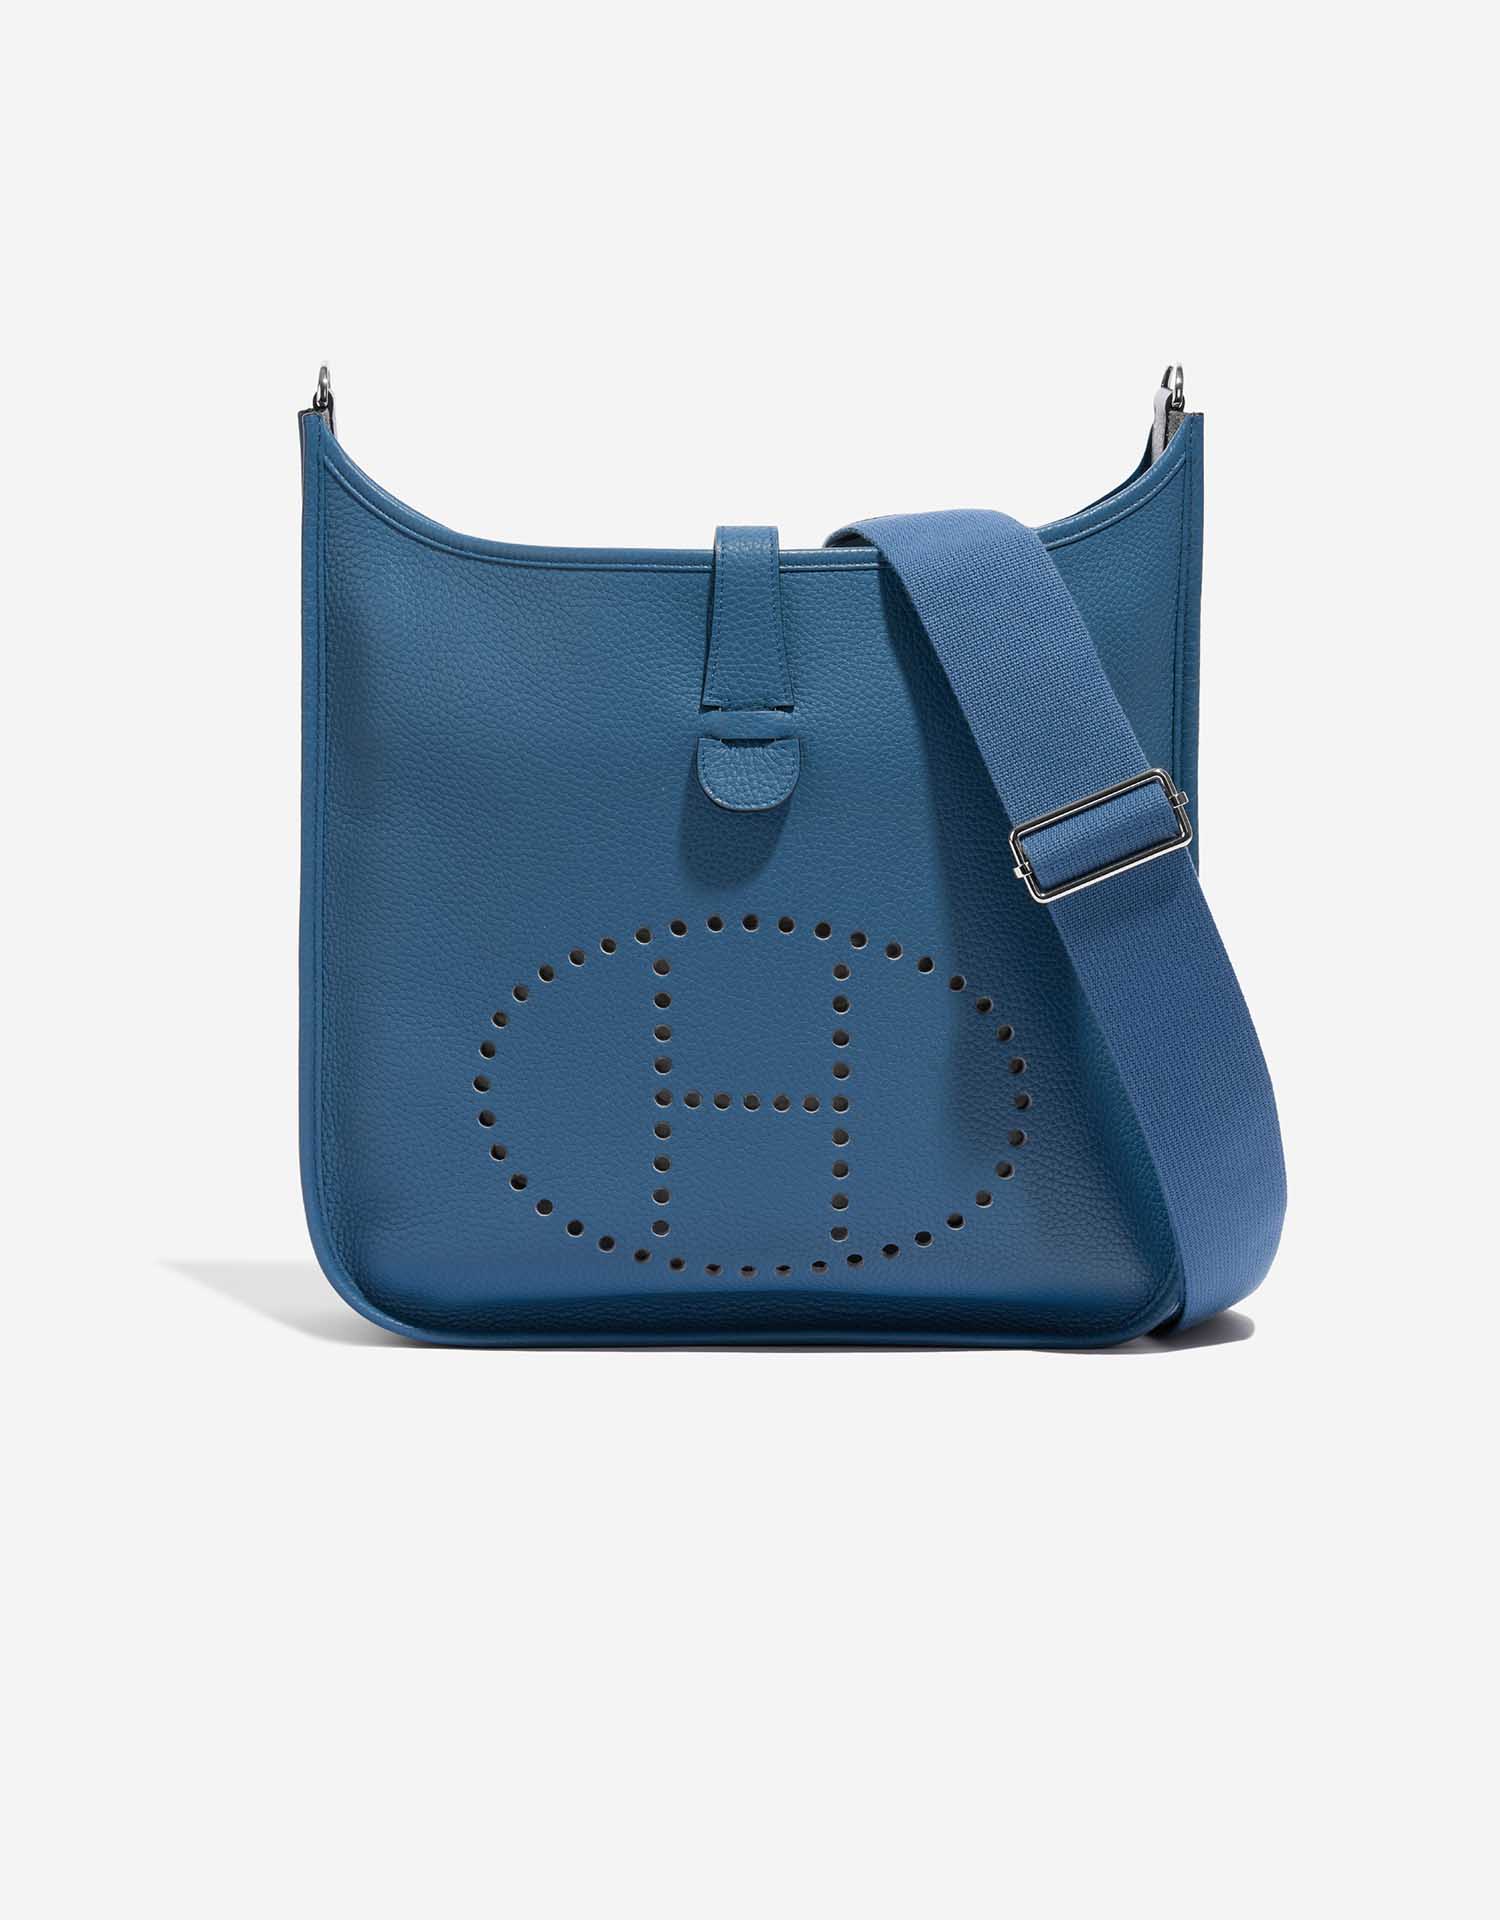 D' Borse - Hermes Evelyne 3 PM 29cm In Blue Agate Clemence Leather With  e Strap PHW *RARE PIECE* Contact us at 0164553444 Location : 25  Lorong Bangkok,Pulau Tikus,10250 Georgetown Pg PM